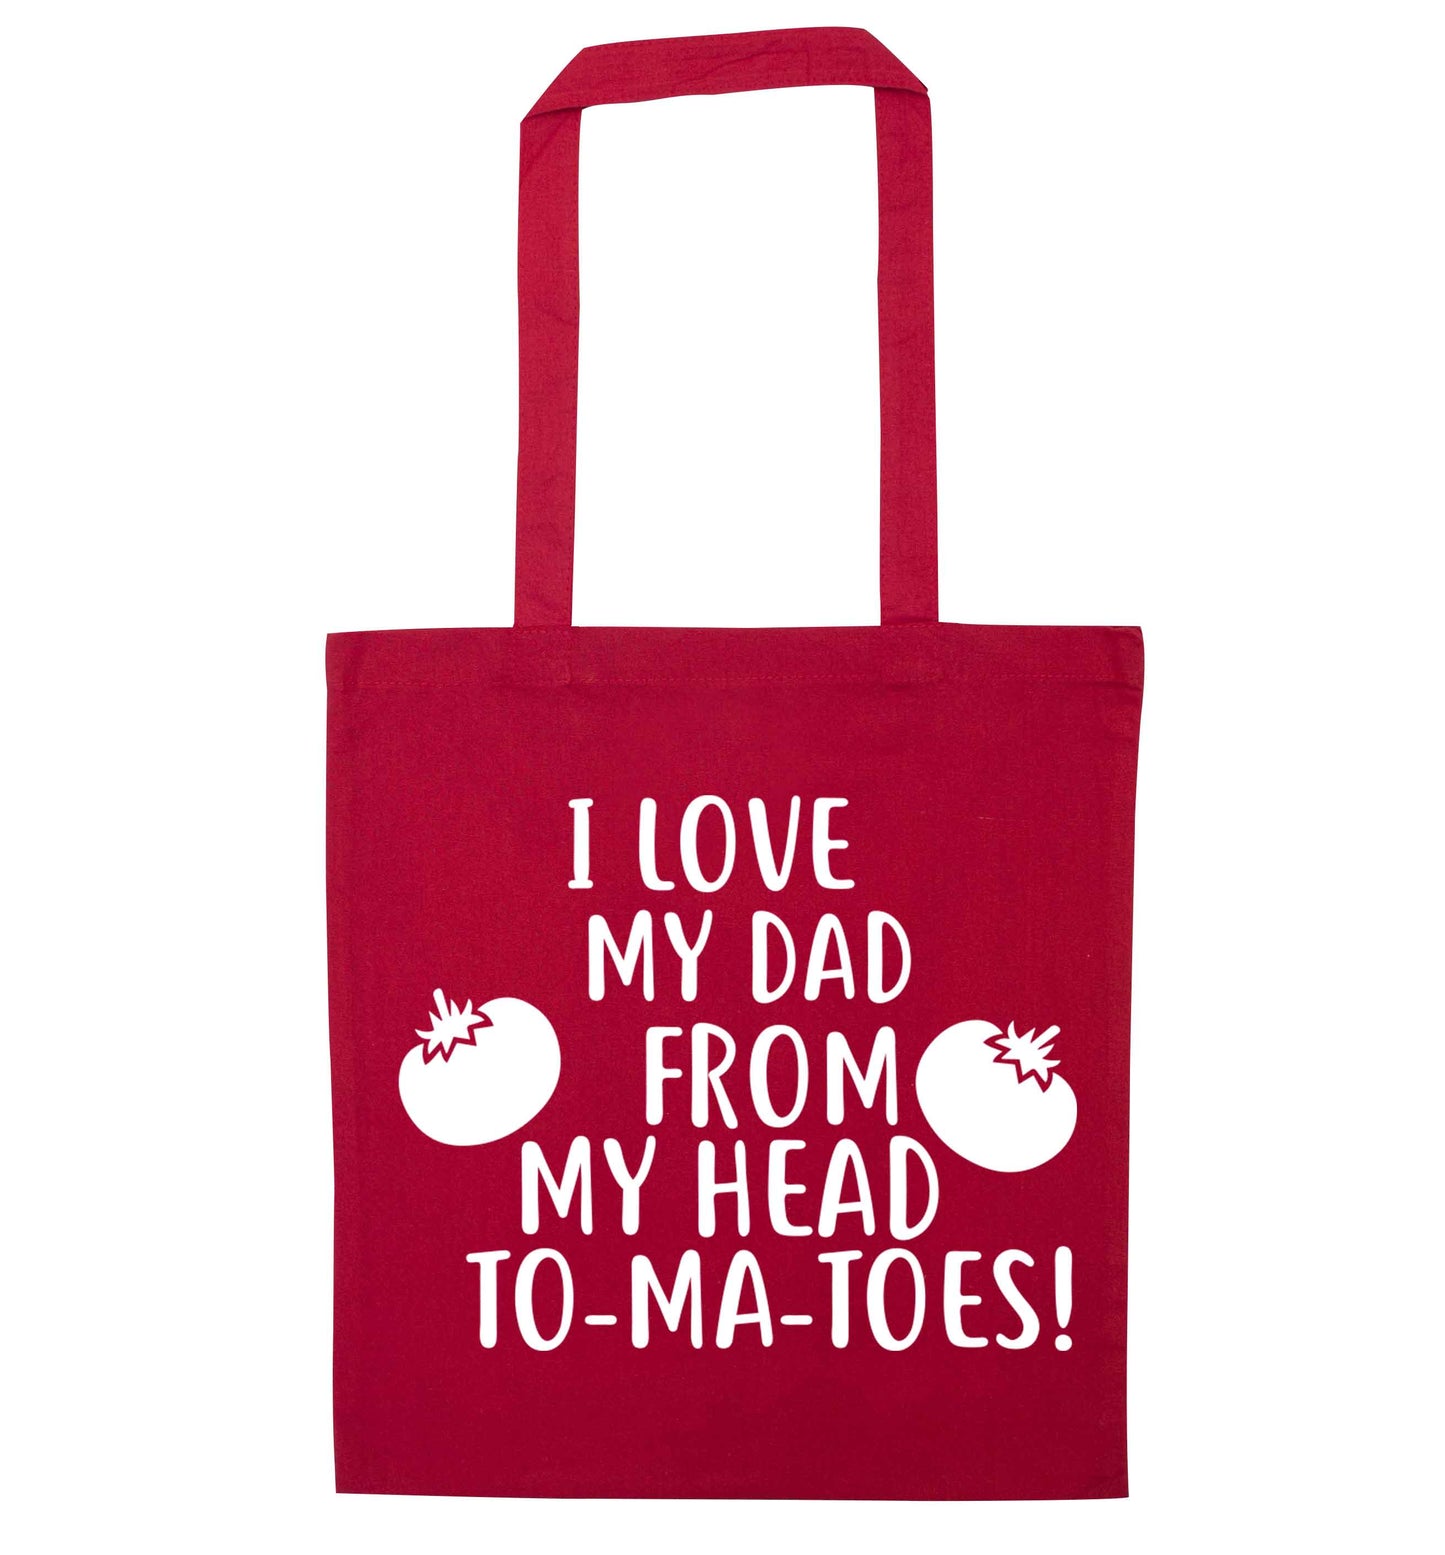 I love my dad from my head to-ma-toes red tote bag